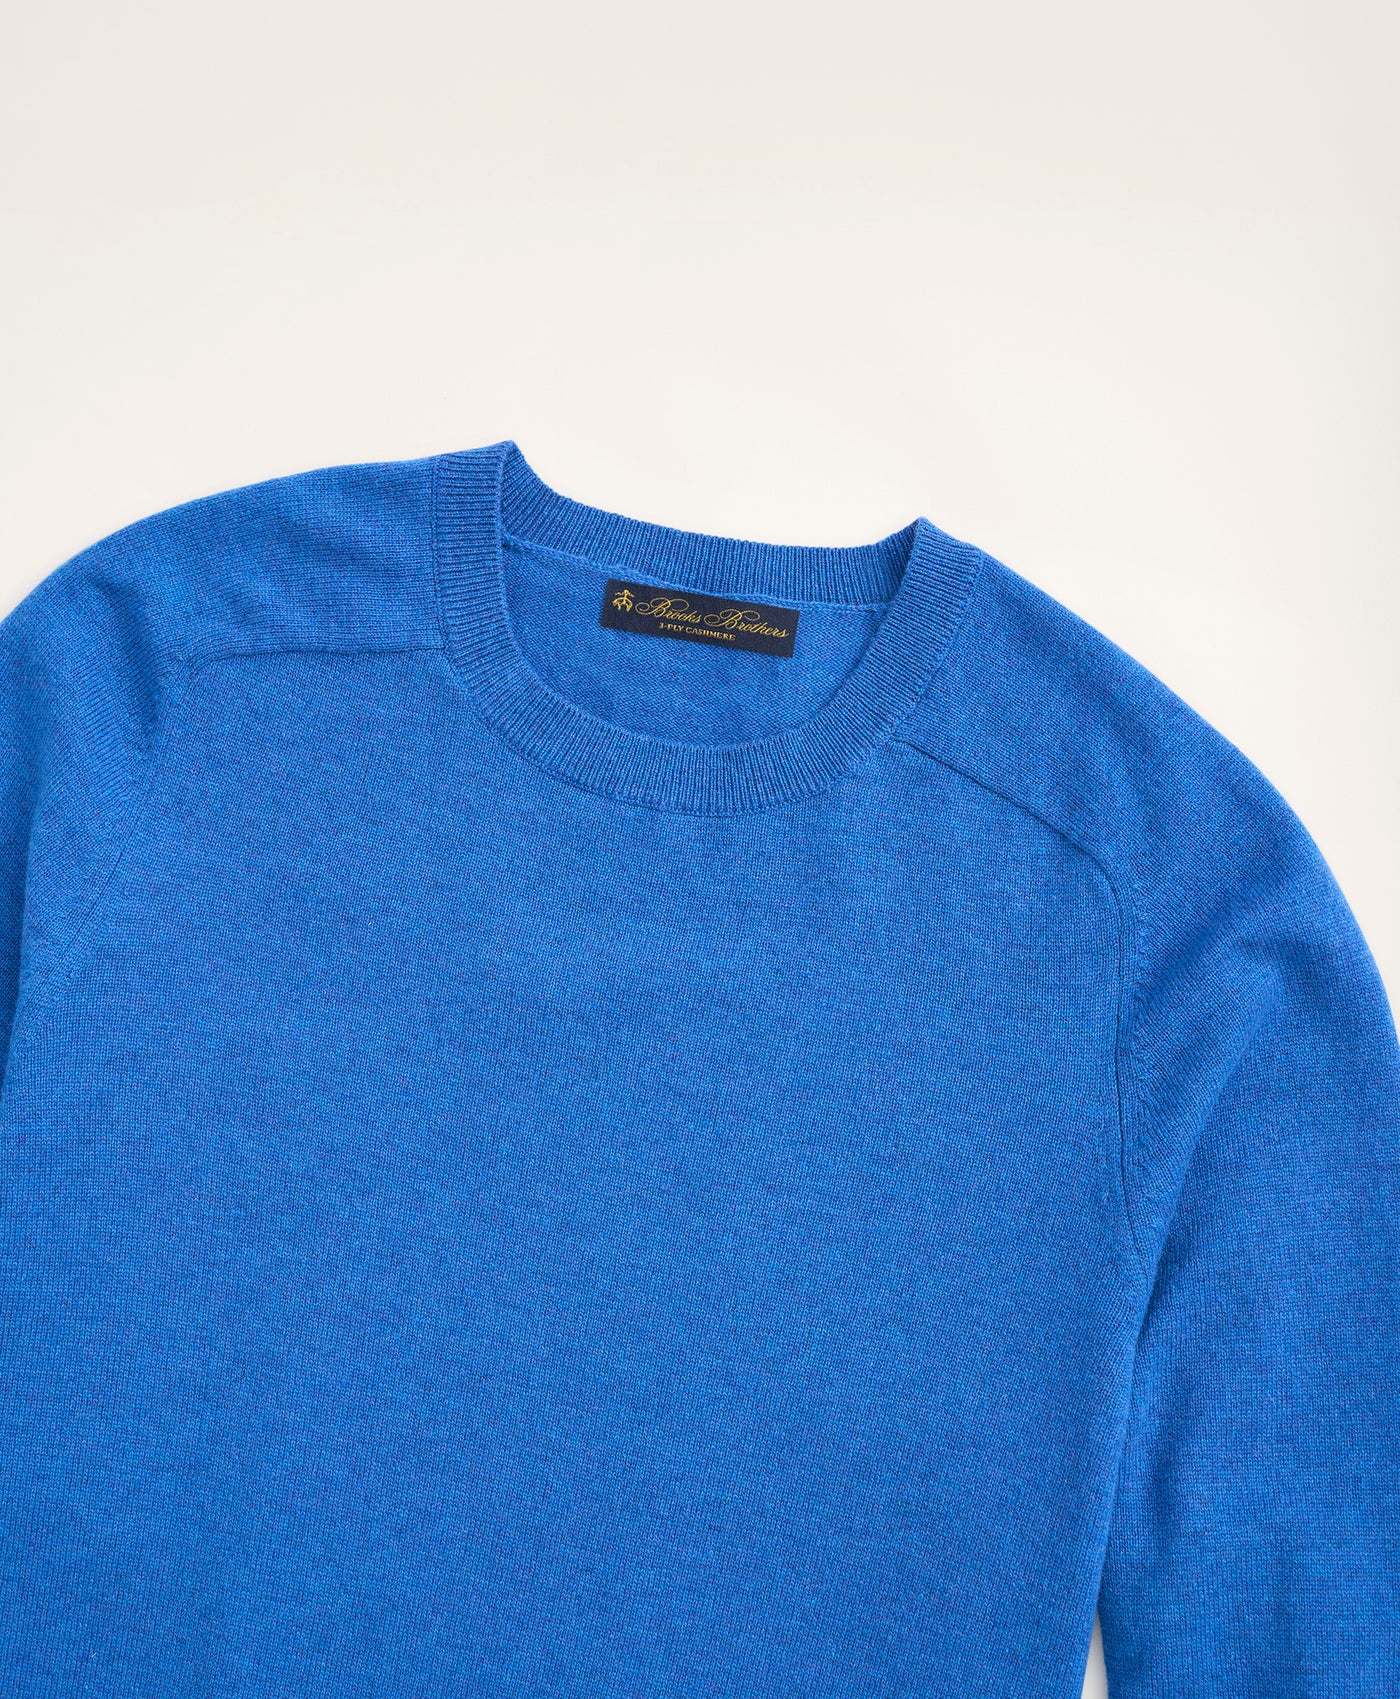 3-Ply Cashmere Crewneck Sweater - Brooks Brothers Canada